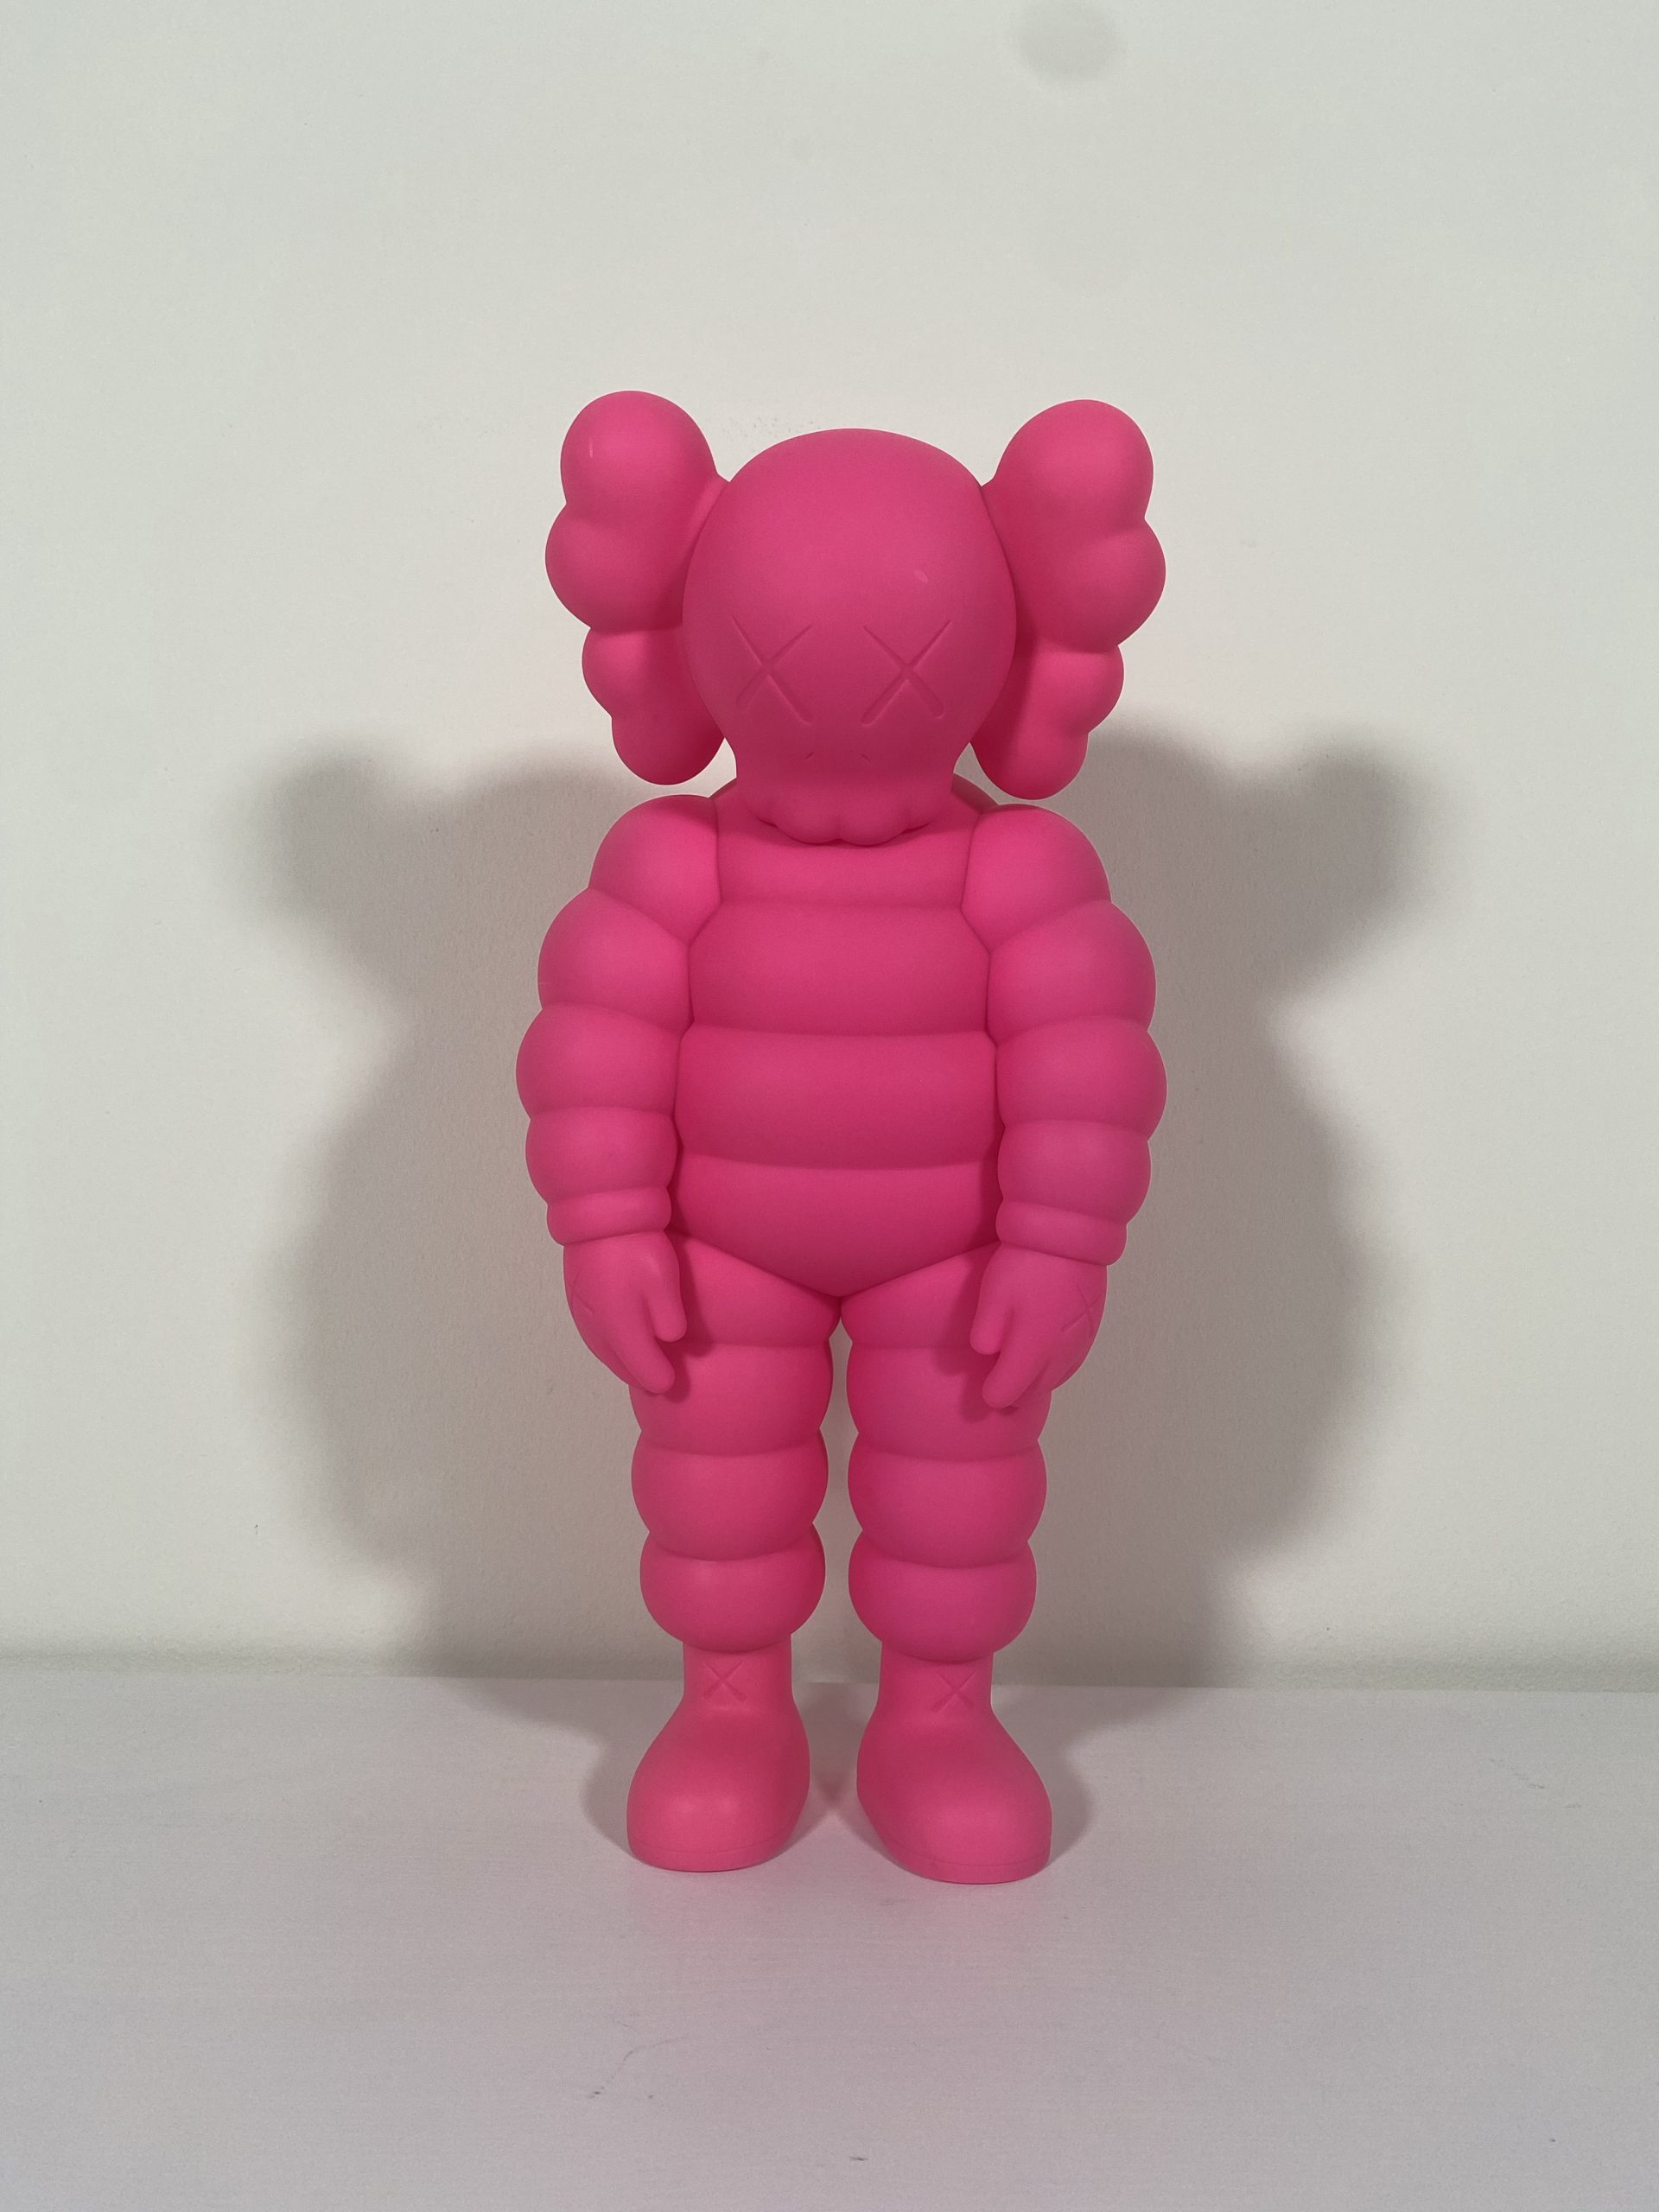 Kaws “What Party 2020” Pink - Merrion Gallery